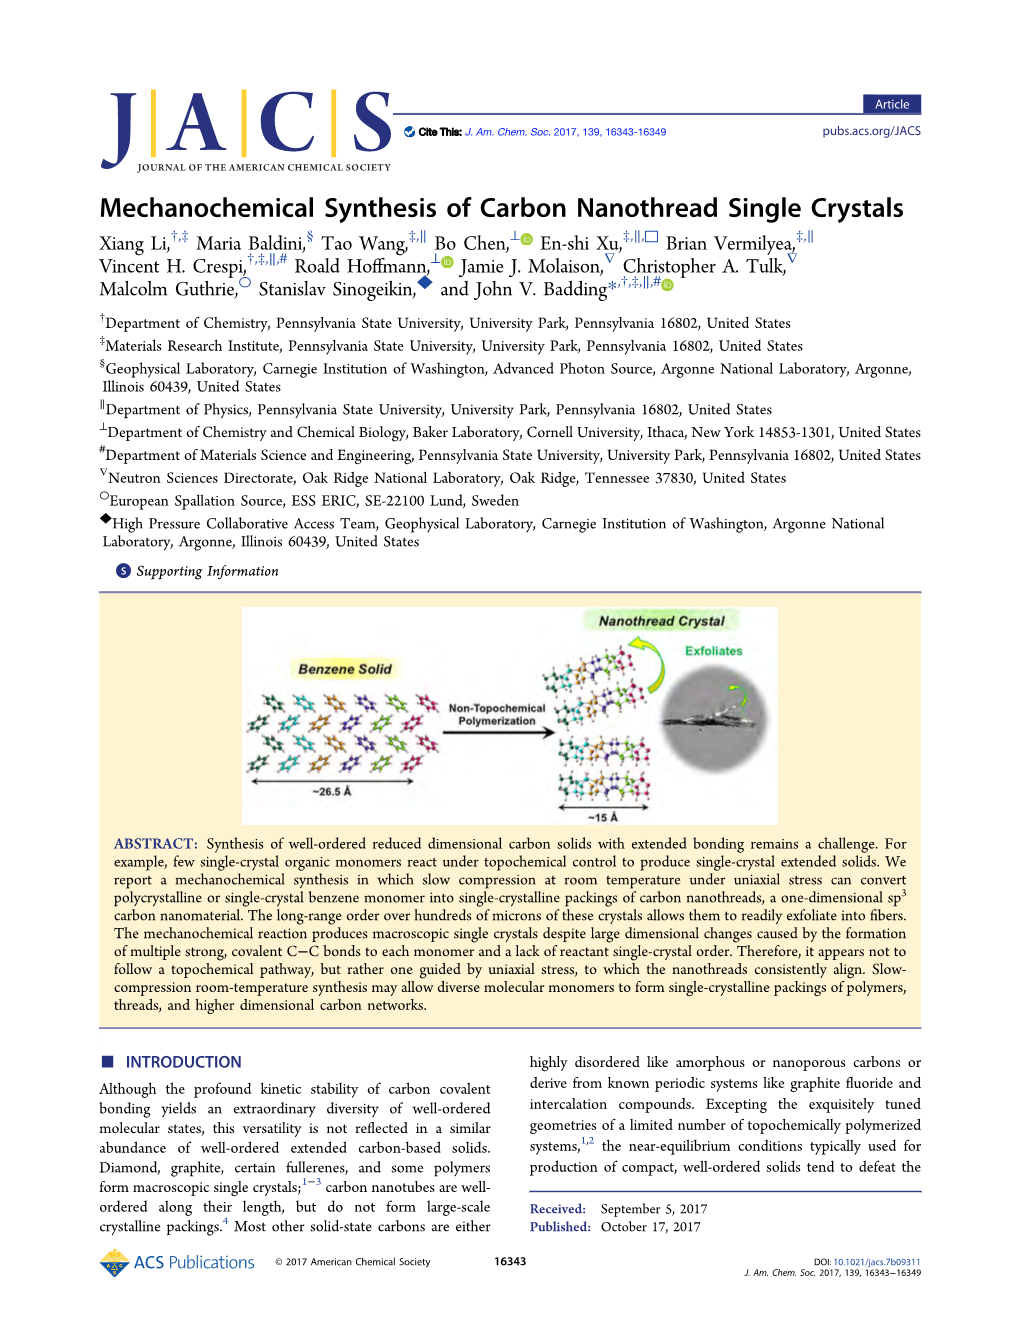 Mechanochemical Synthesis of Carbon Nanothread Single Crystals